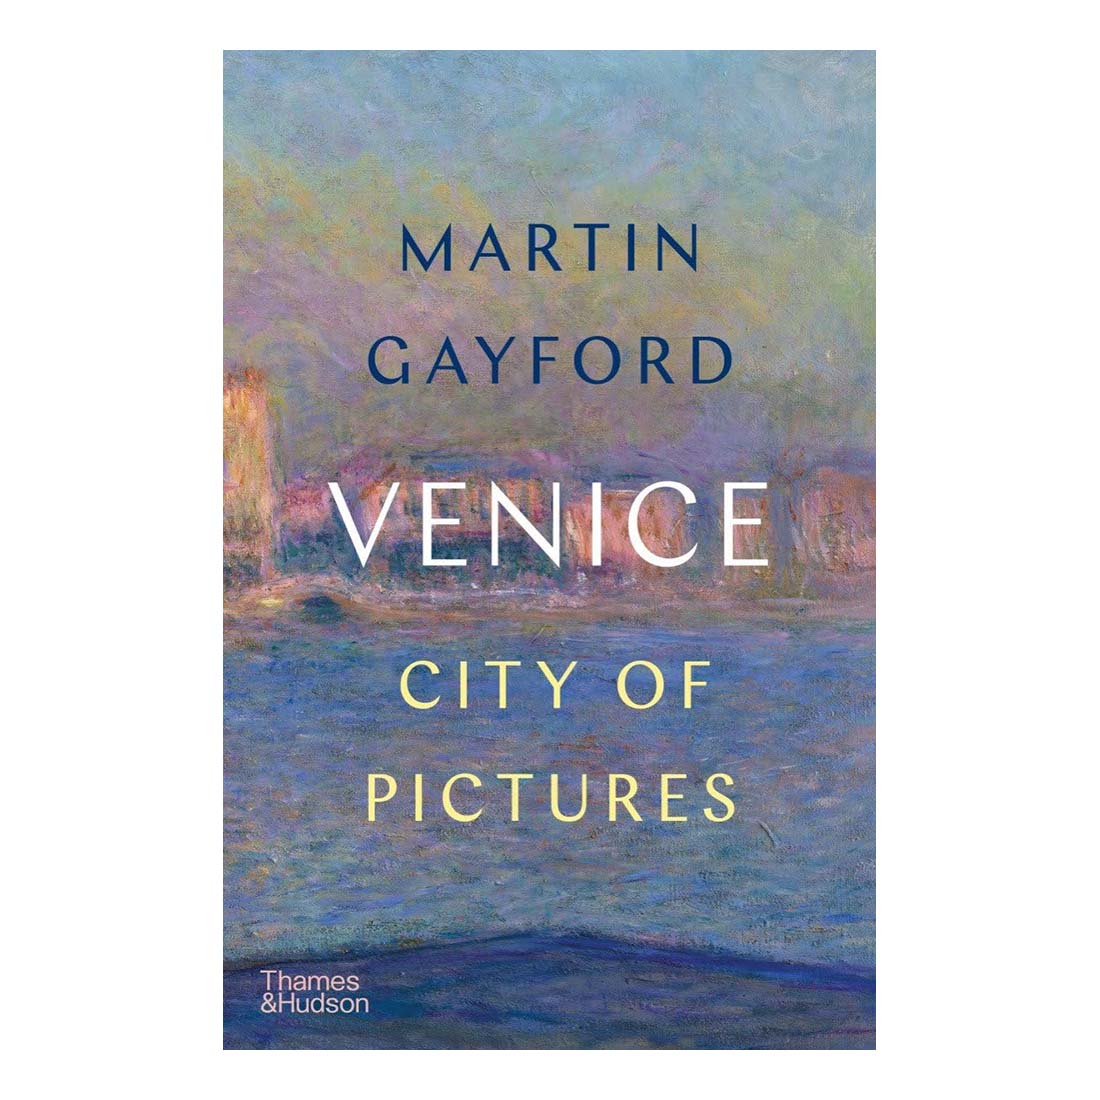 Venice: City of Pictures